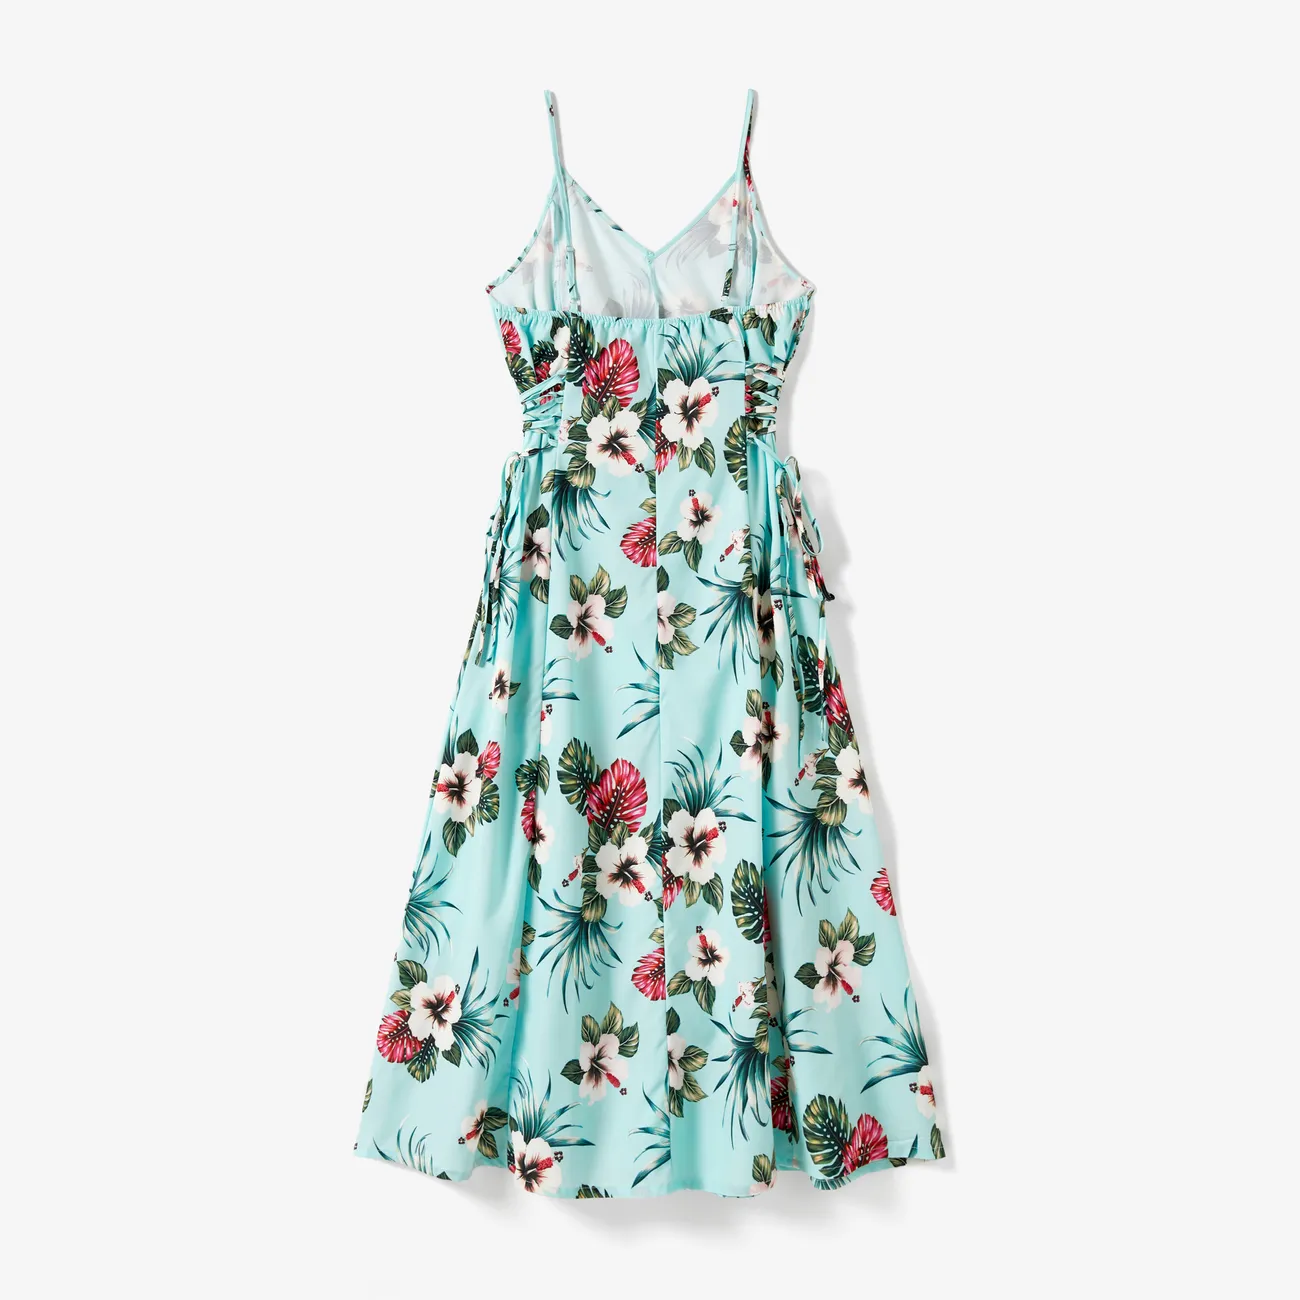 Family Matching Allover Floral Print Cami Dresses and Short-sleeve Shirts/Tops Sets Light Green big image 1